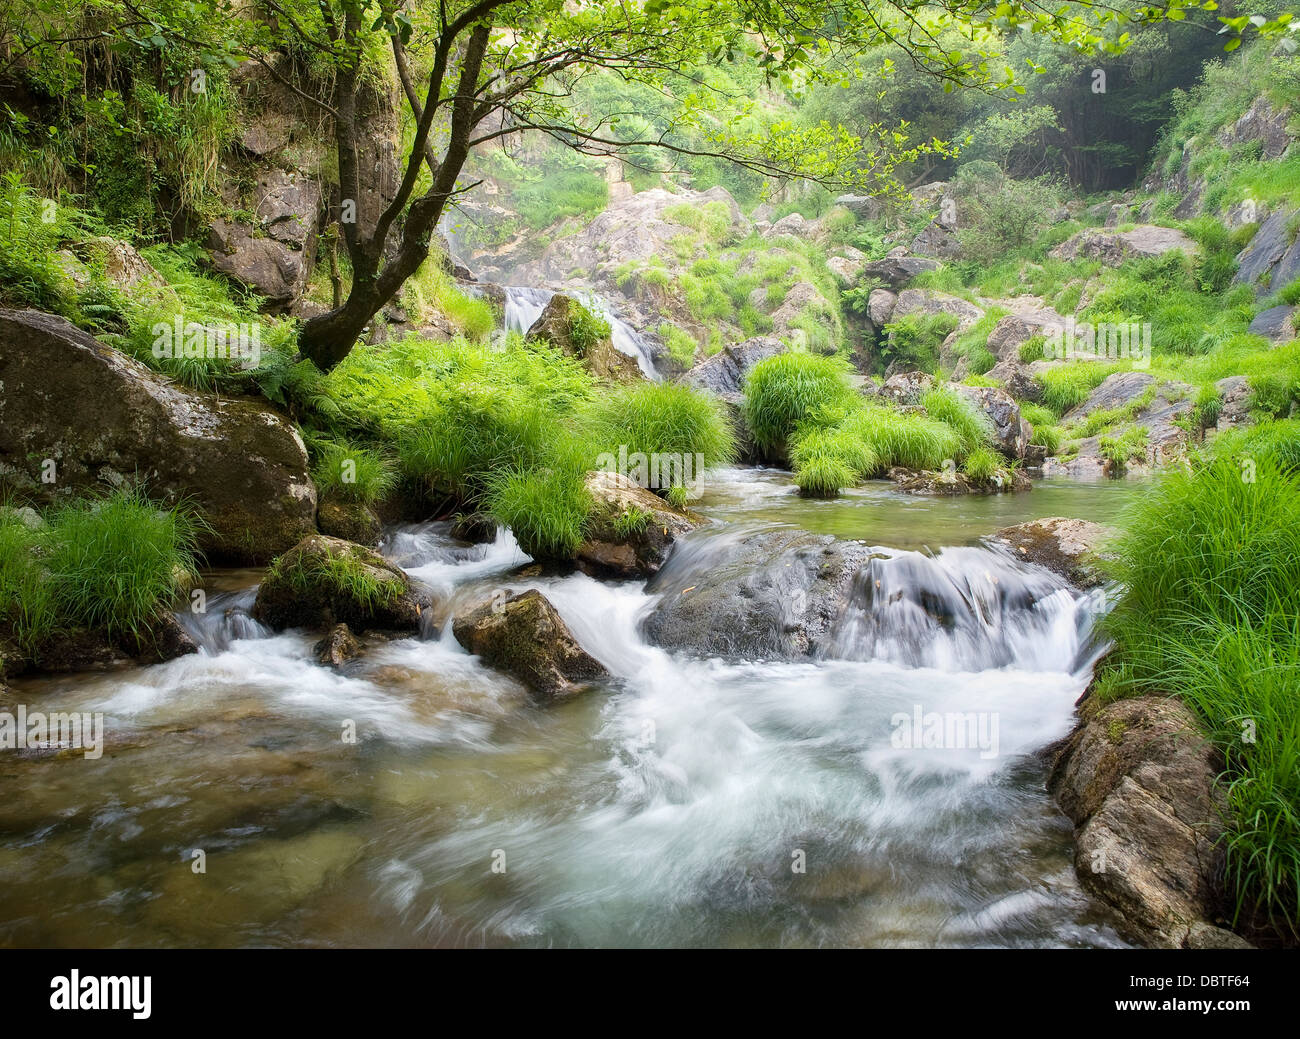 Beautiful river in Galicia. This river is called Belelle and is located in Neda, Galicia, Spain. Stock Photo